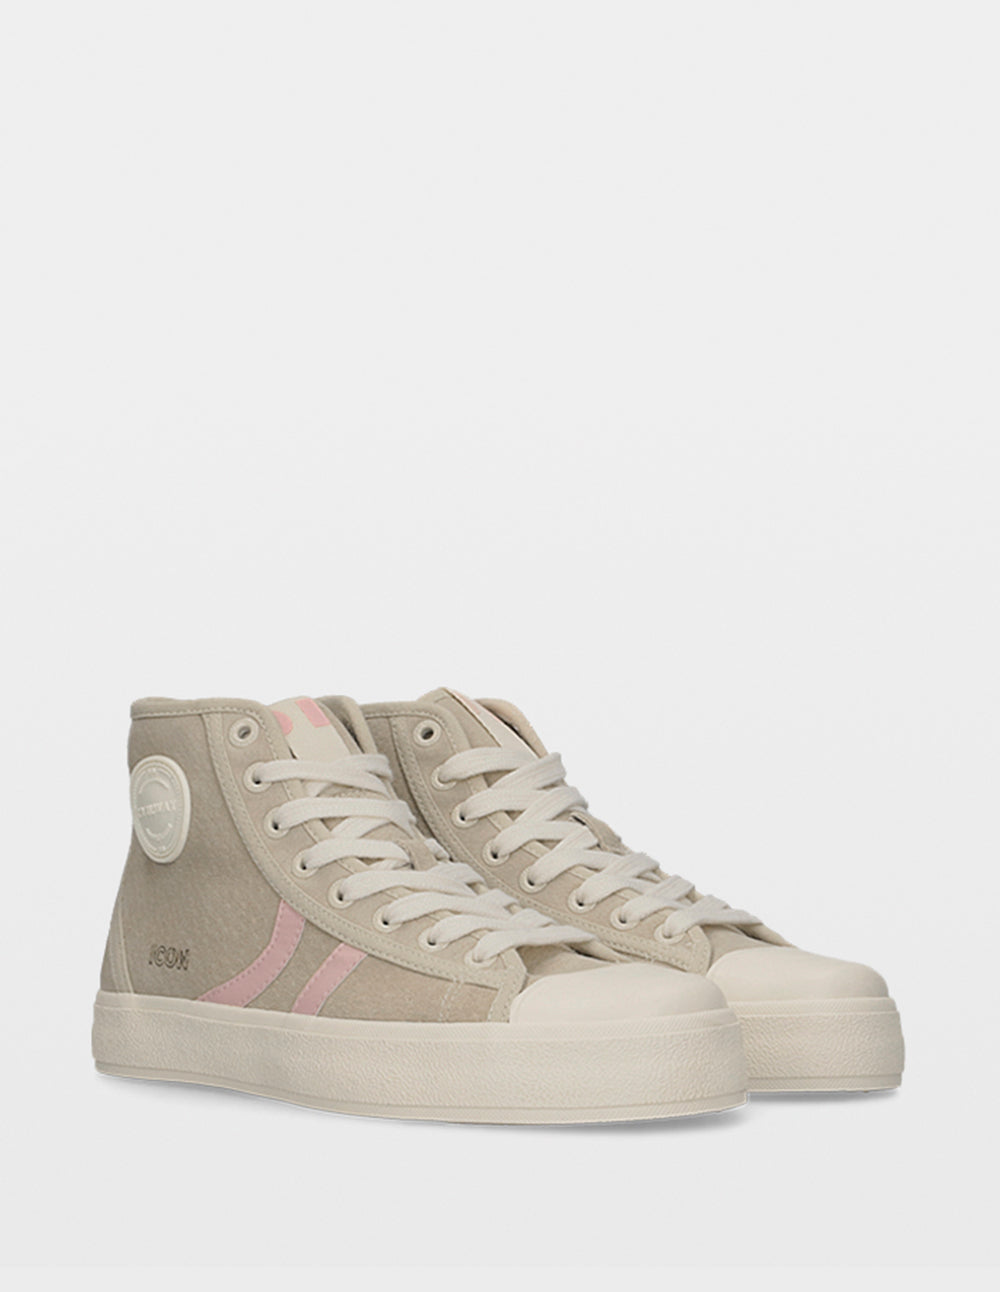 ICON-HI BEIGE/PINK LEATHER MUJER